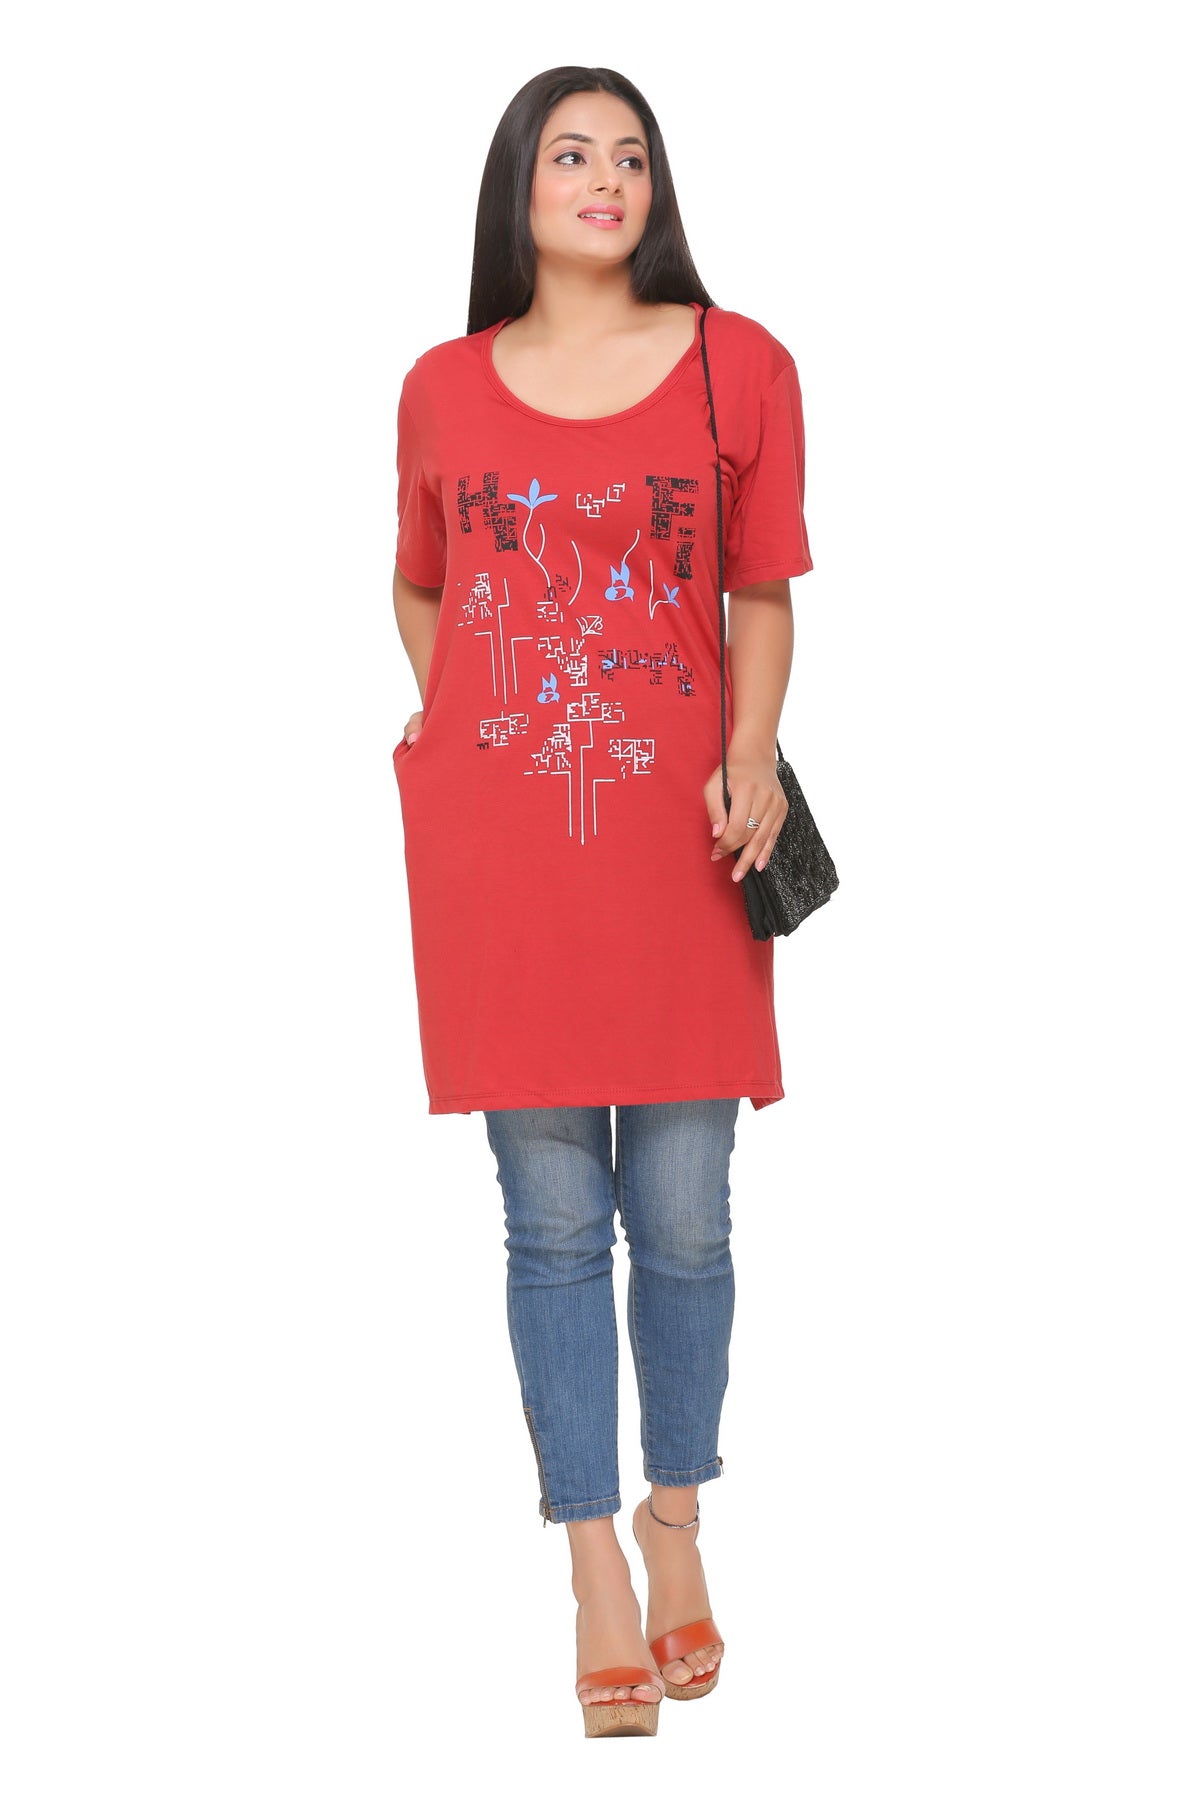 Plus Size Long T-shirt For Women - Half Sleeve - Rust Red